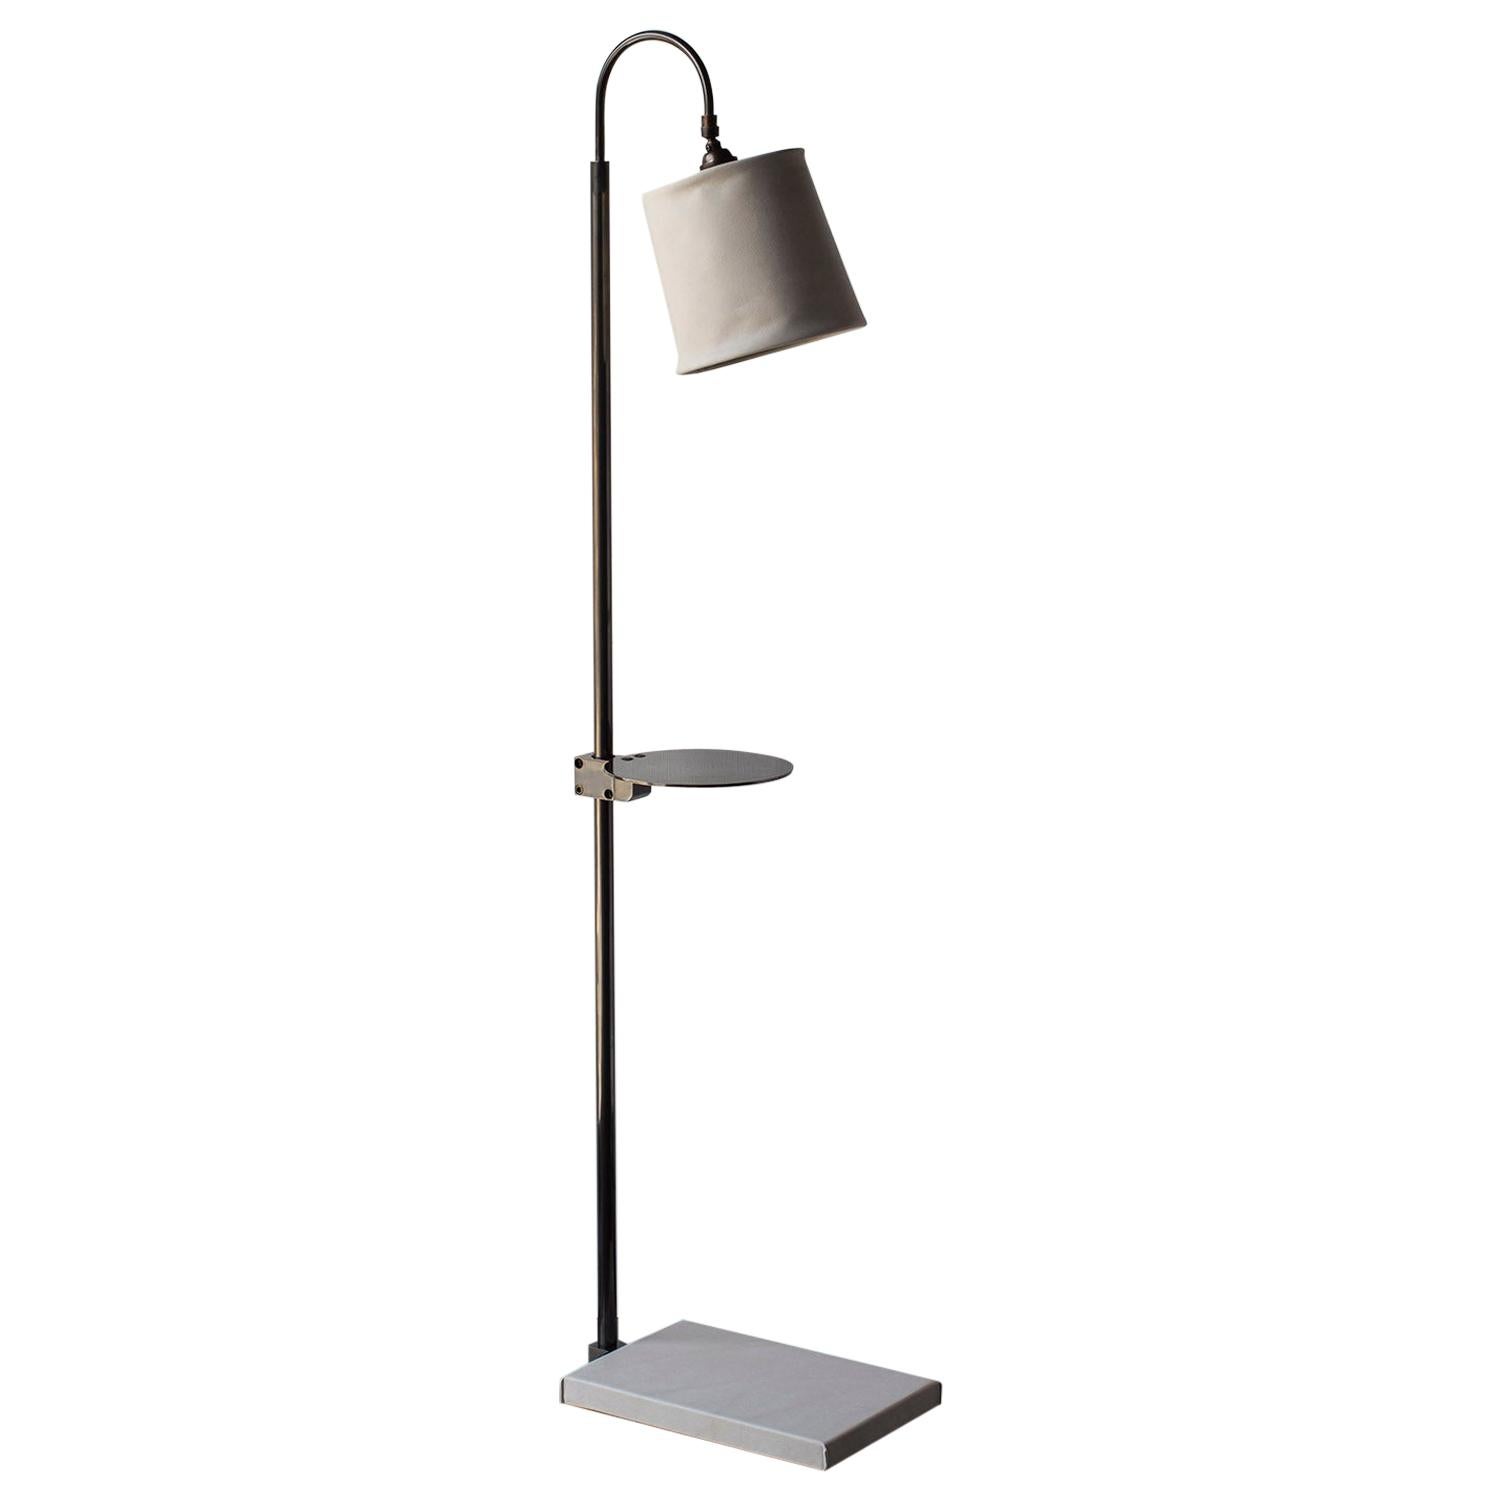 Series01 Floor Lamp, Drink Tray, Ash Gray Leather, Dark Patinated Brass For Sale